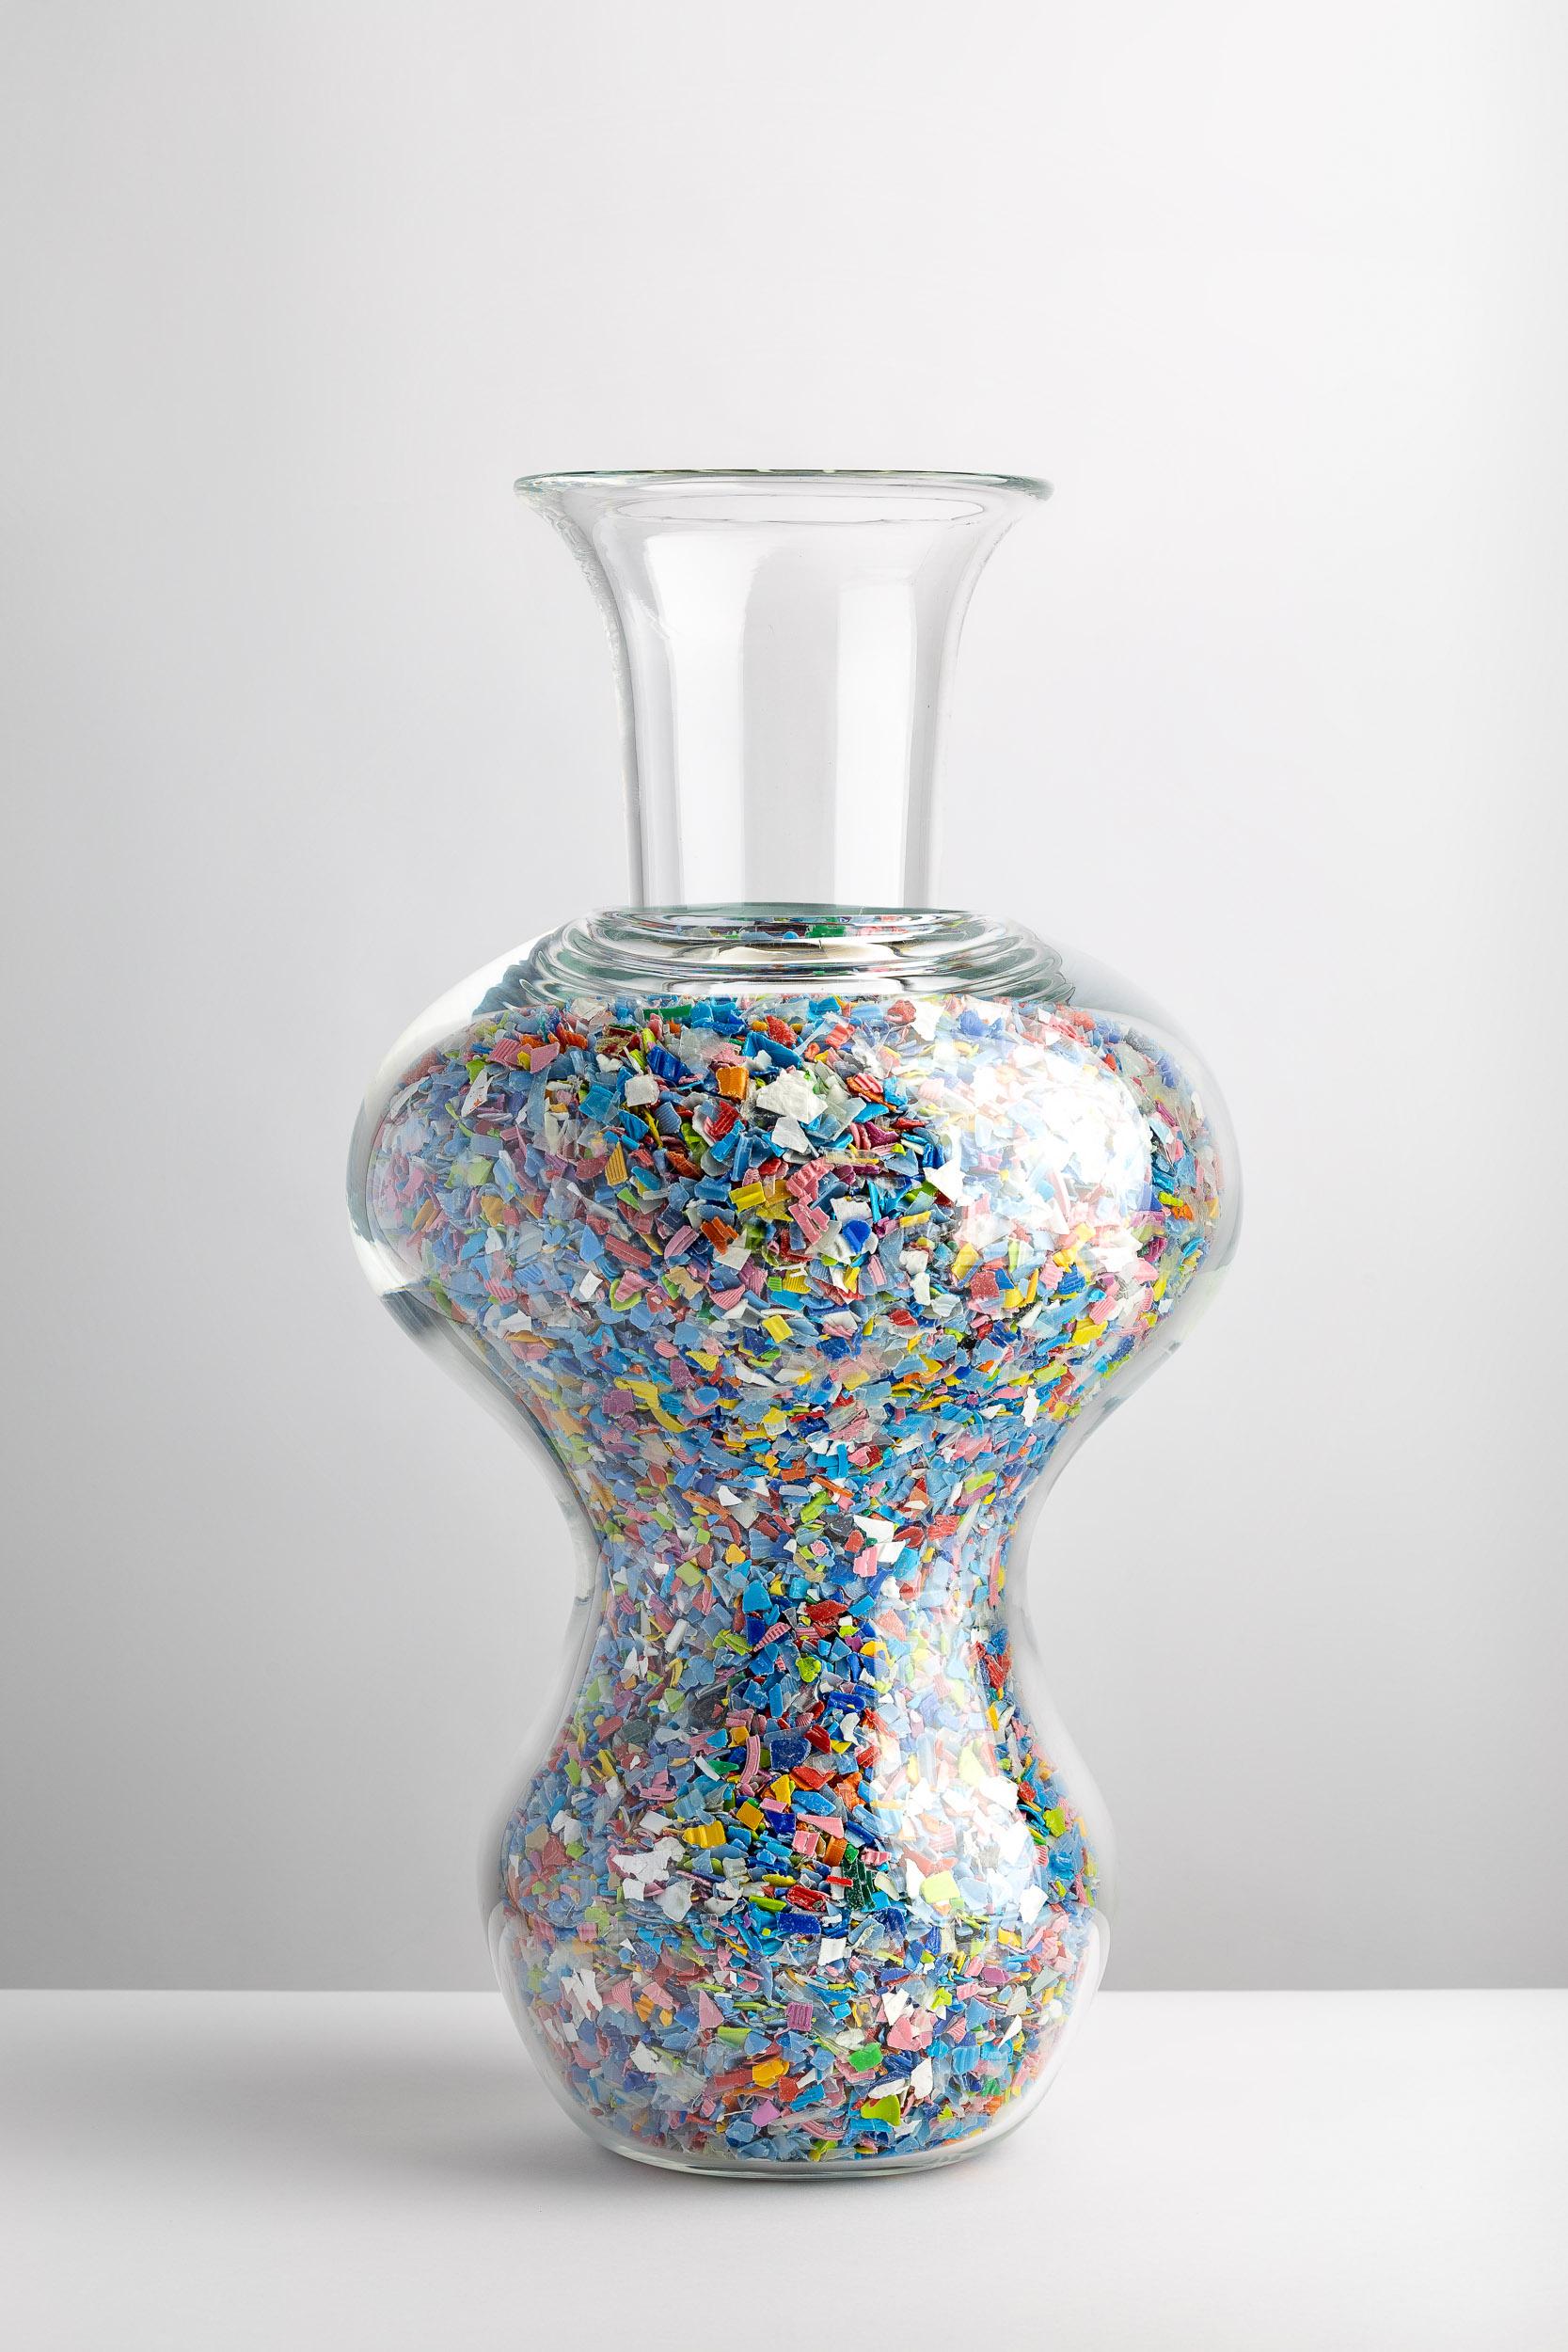 While a vase may usually serve the purpose of keeping plants alive, VELENI’s Vase VA1-10m’s volume is made up of ‘a soil’ of microplastics. The plants or flowers may seem like they are planted in a mound of multi-colored elements, actually waste: an